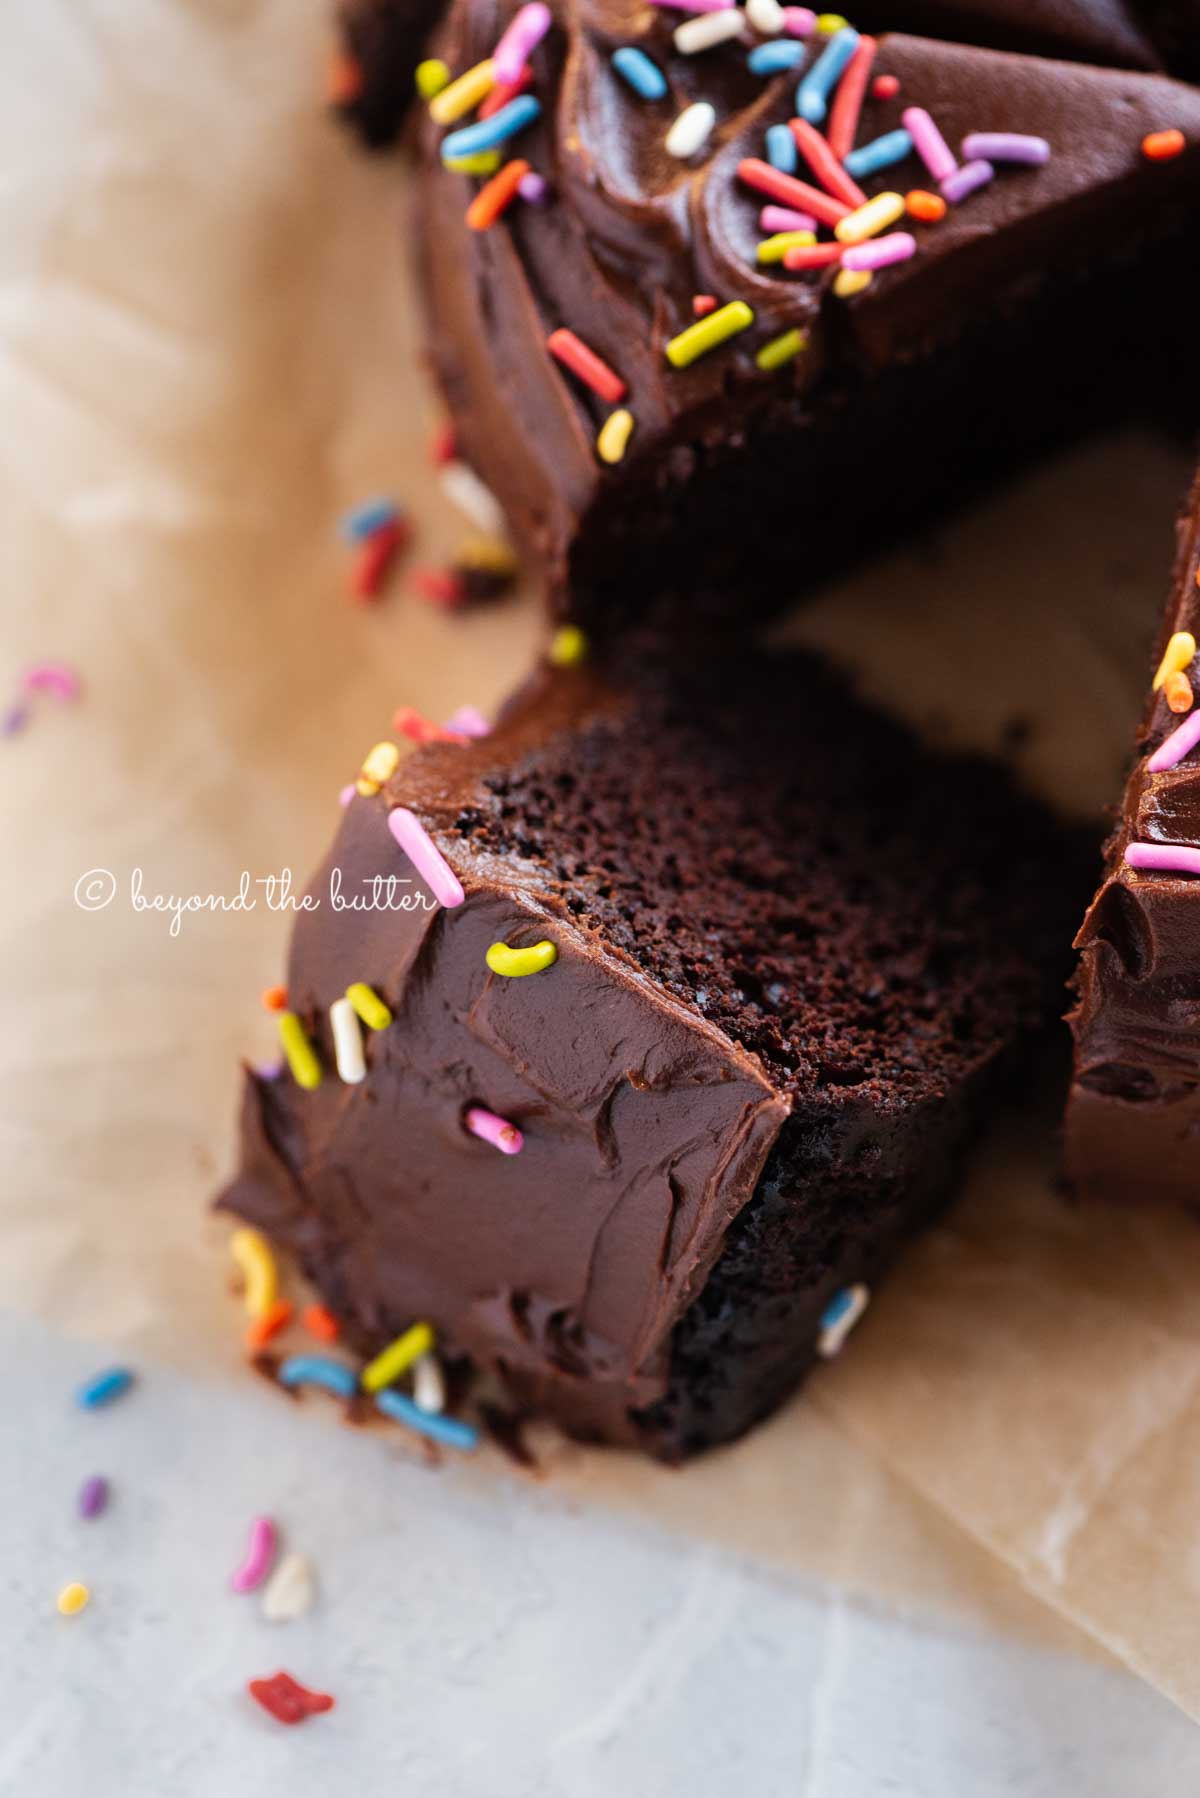 Angled closeup image of single layer chocolate cake with slices cut and randomly placed by the cake | All Images © Beyond the Butter®